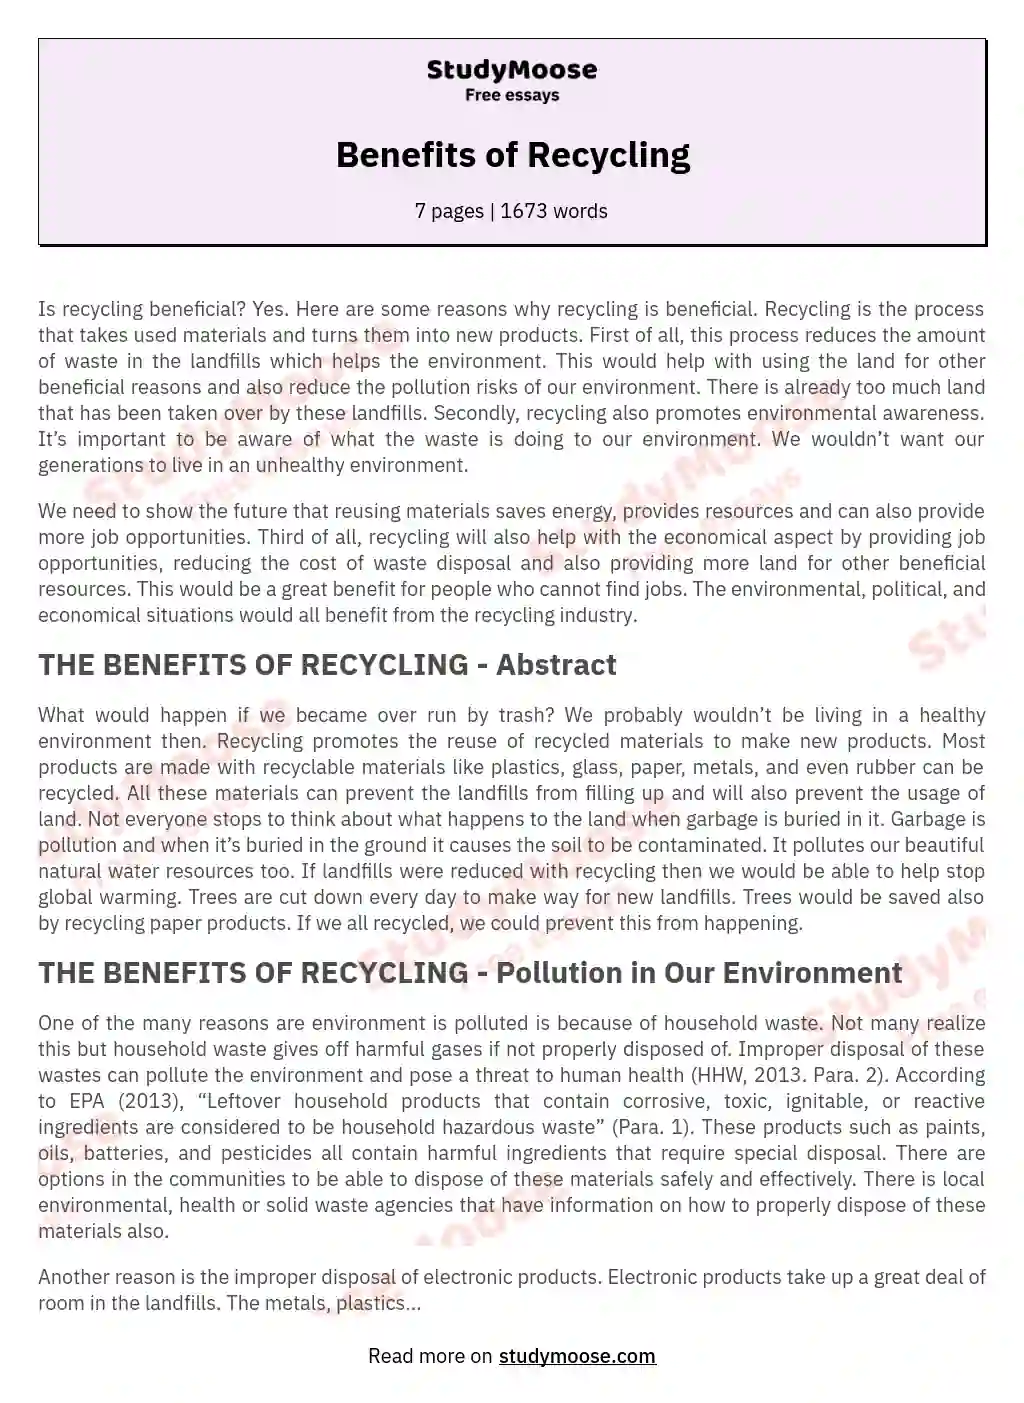 Benefits of Recycling essay